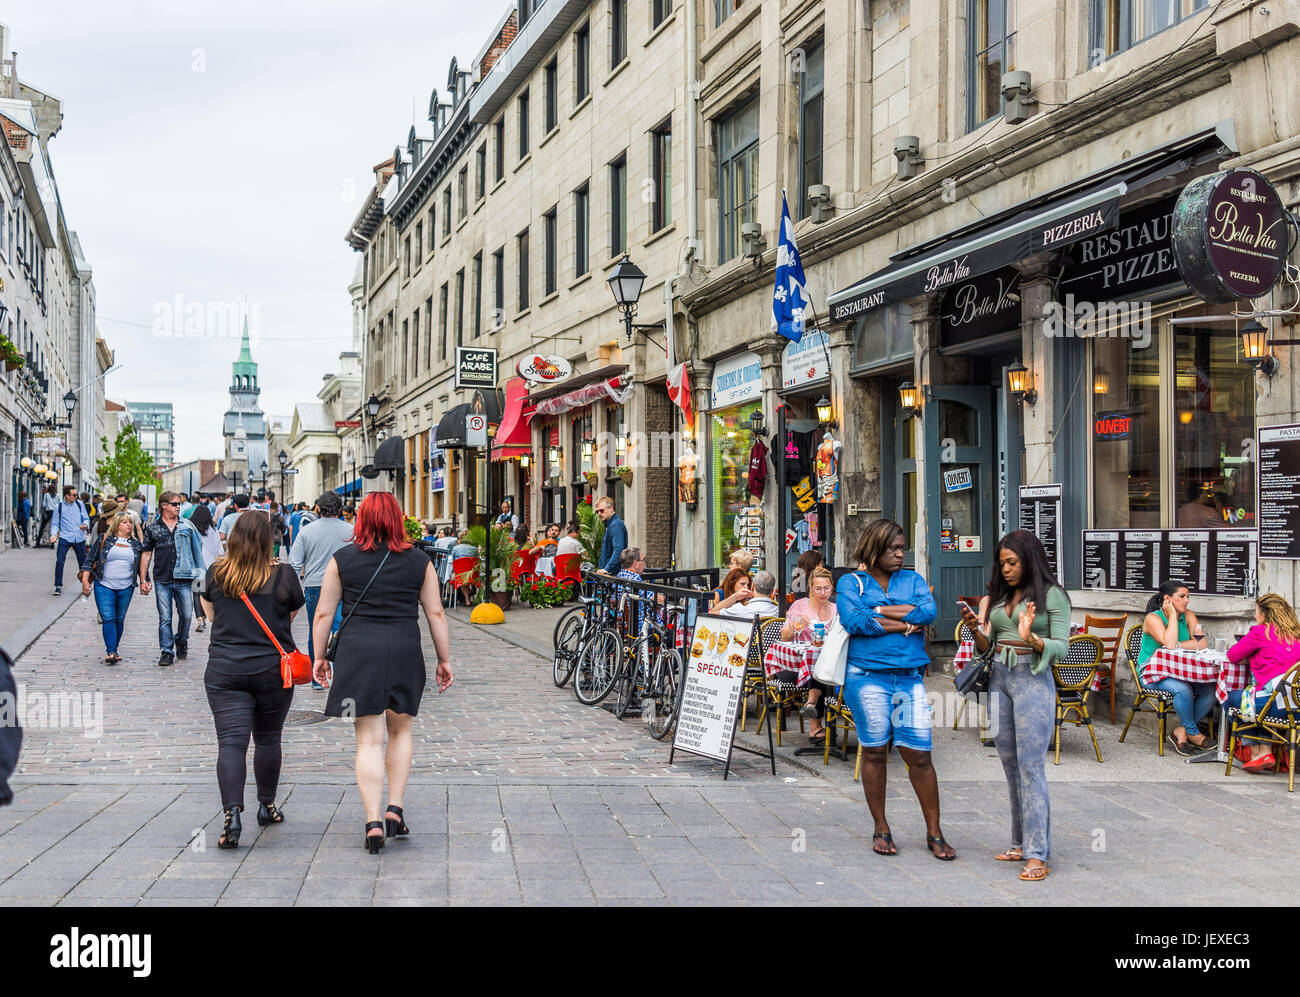 Montreal, Canada - May 27, 2017: Old town area with people walking up street in evening outside restaurants in Quebec region city Stock Photo